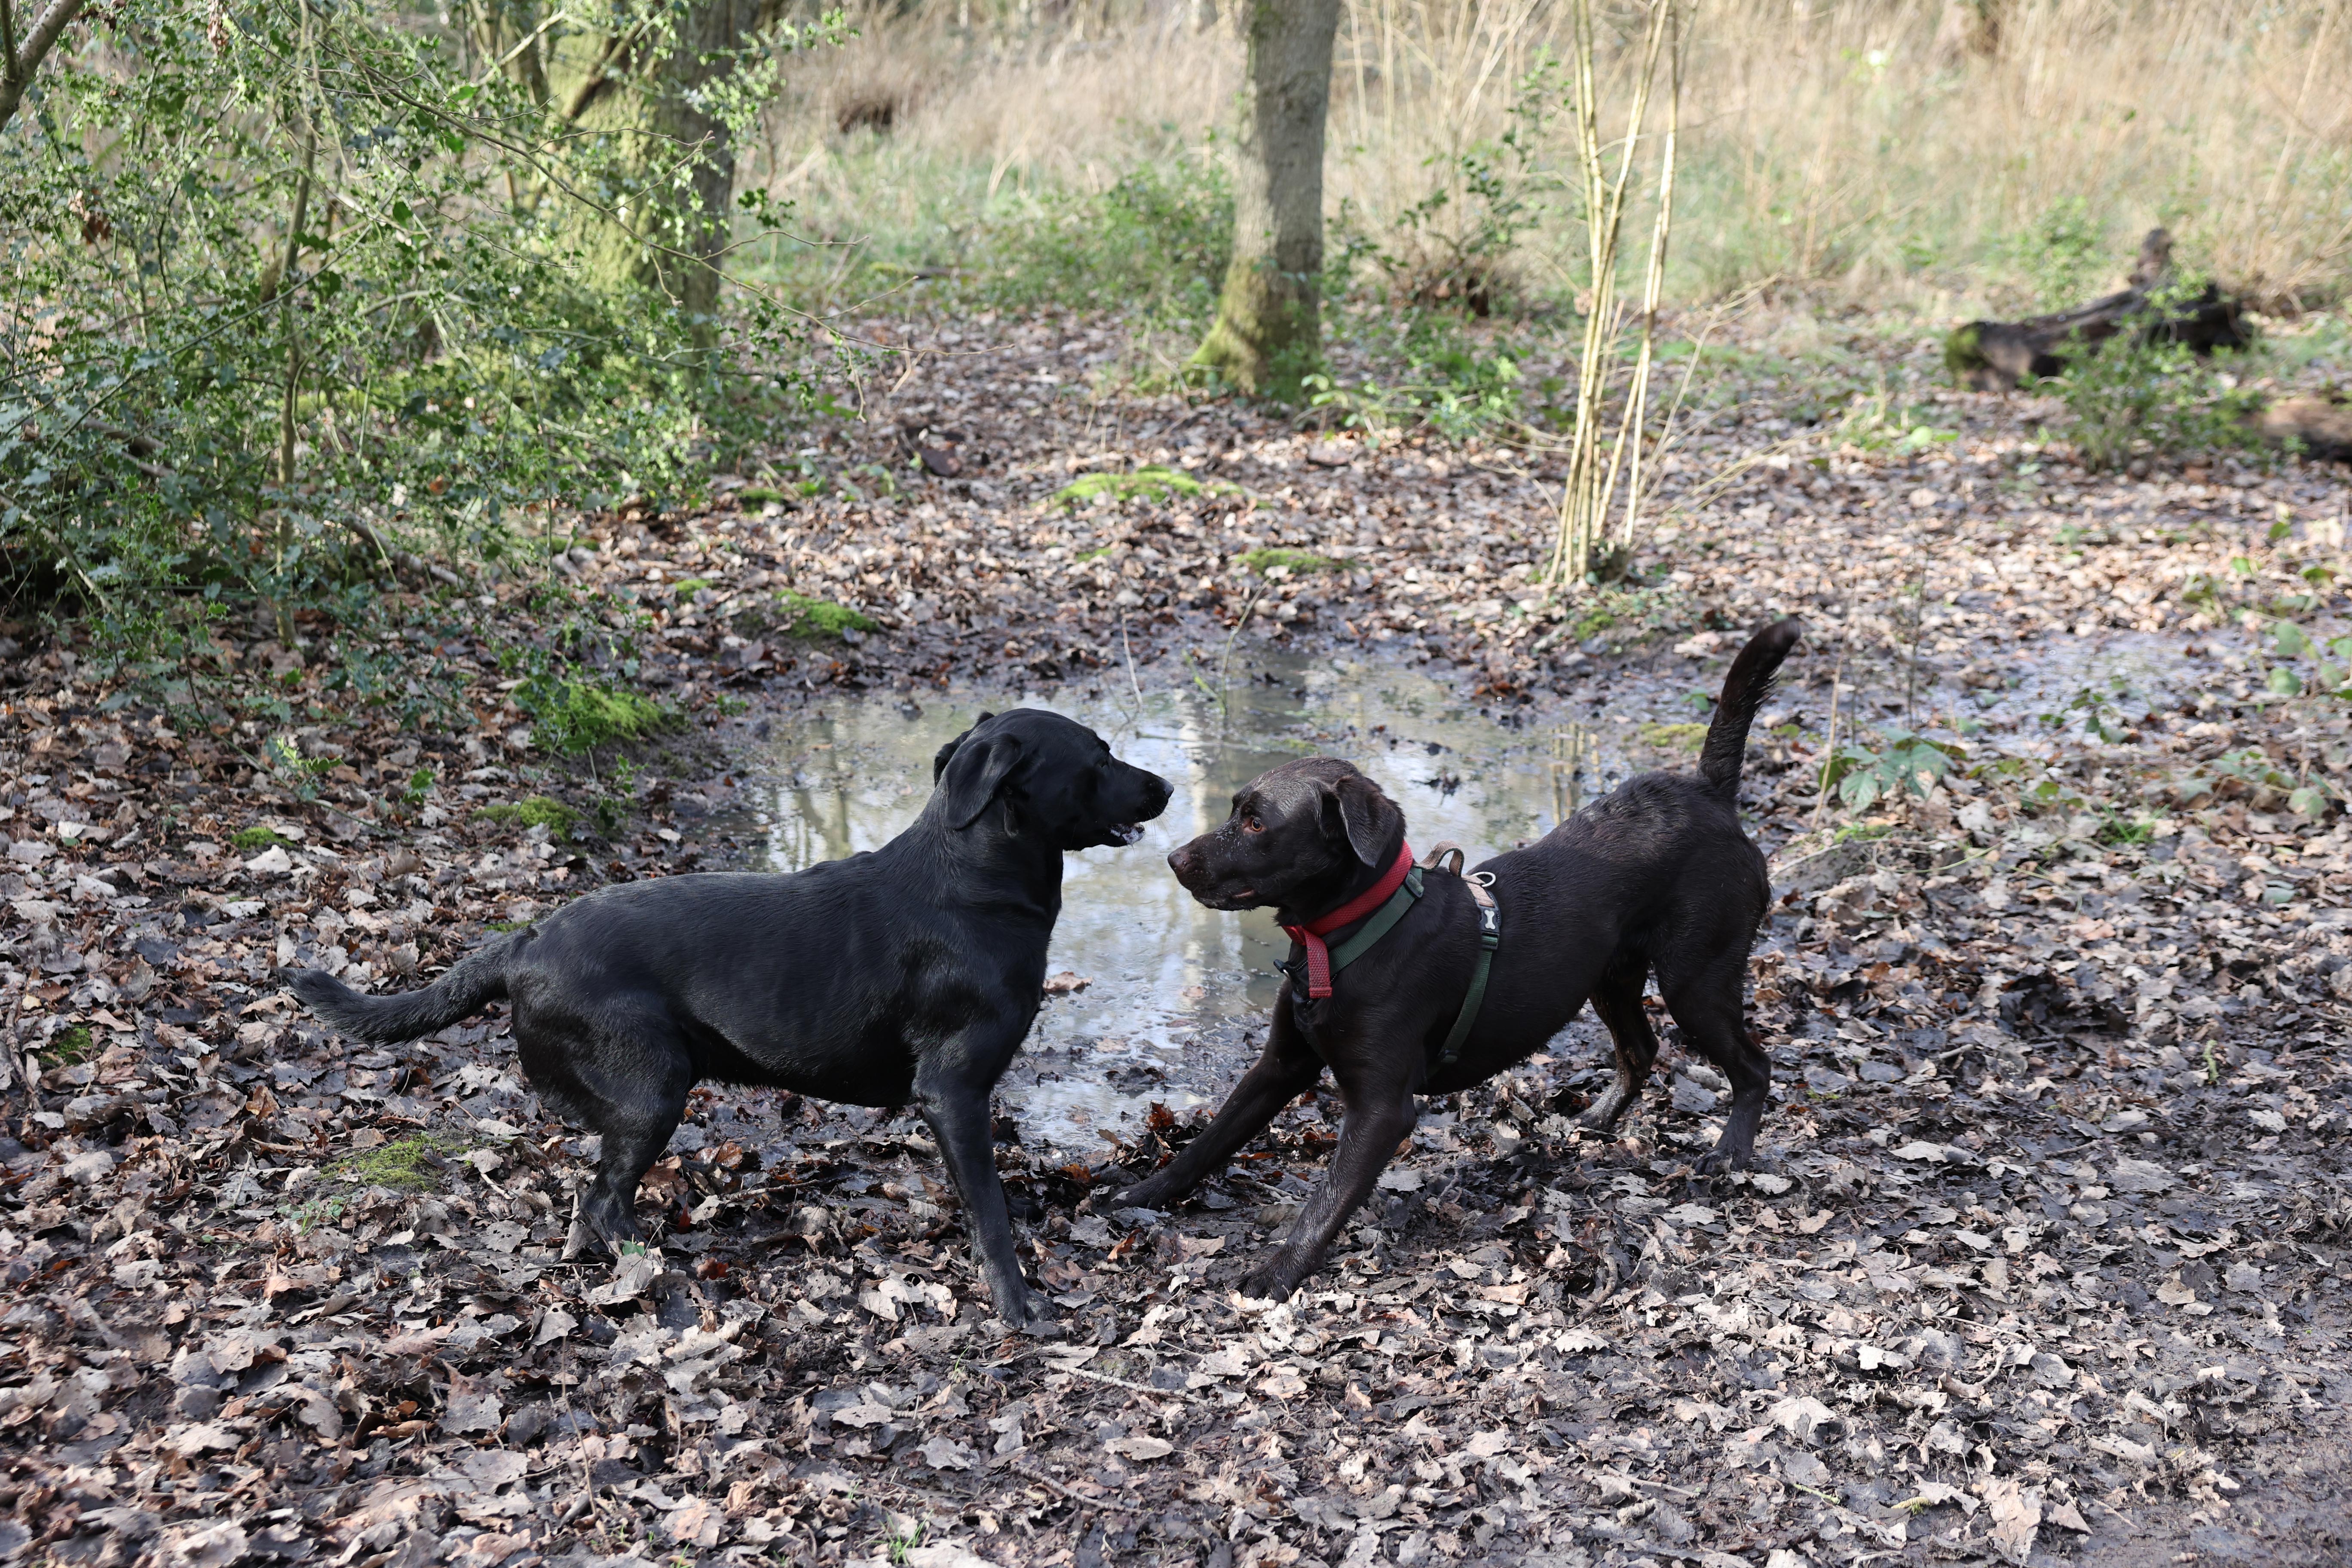 A shot taken with the Canon EOS R6. It shows two Labrador dogs playing in a wood